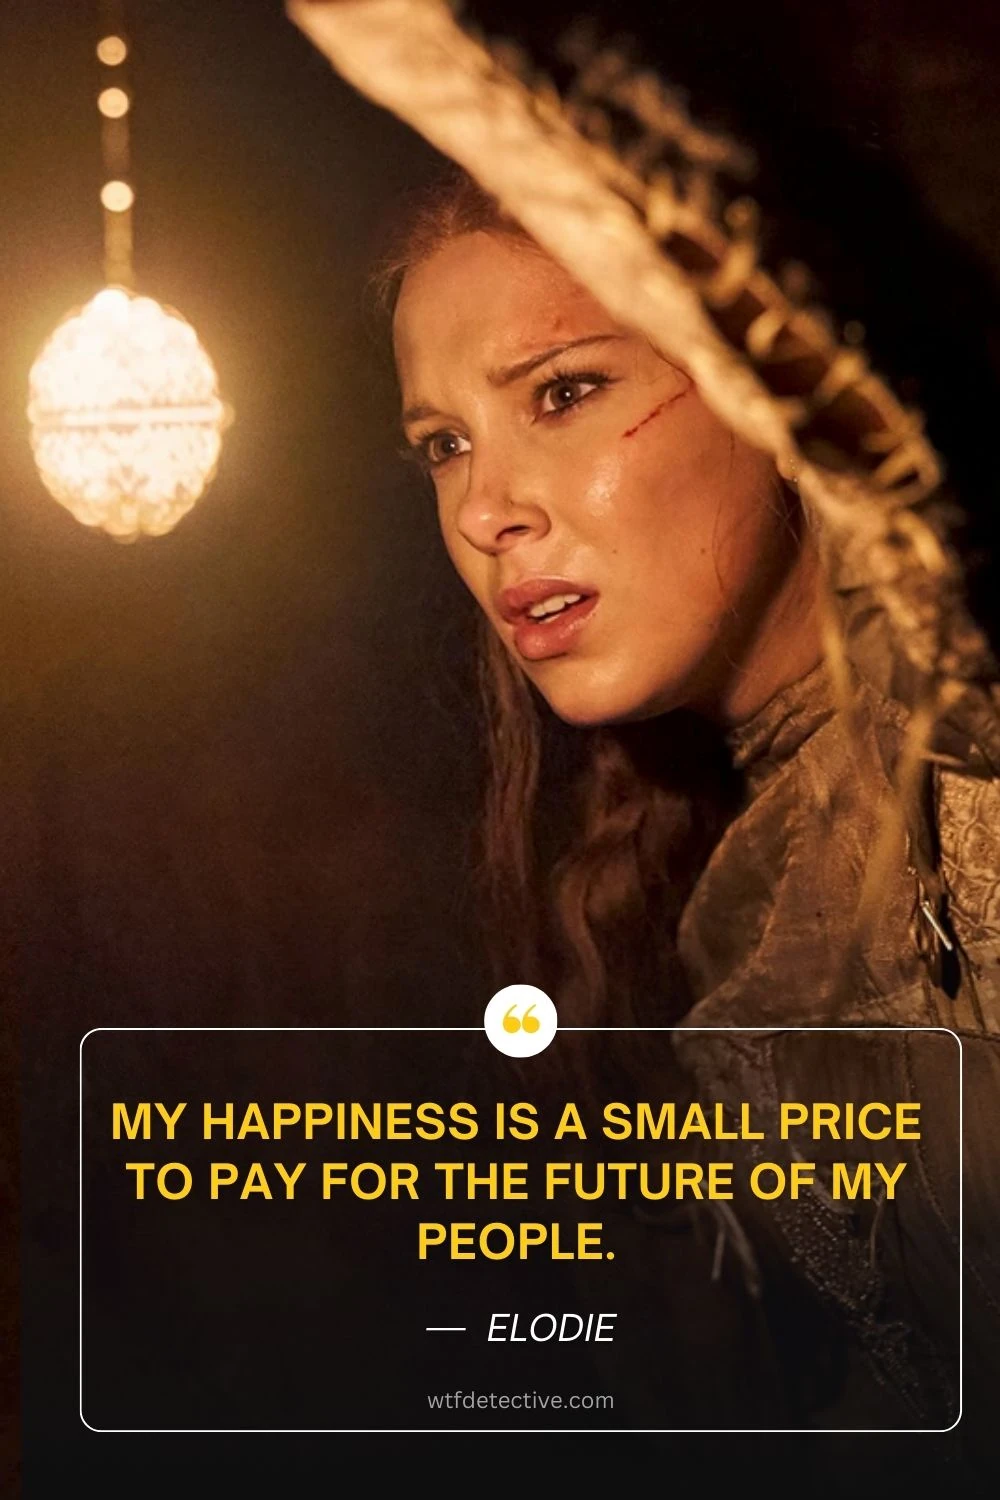 damsel 2024 quotes, netflix 2024 movie quotes, millie bobby brown 2024 damsel, happiness small price quotes, future of my people quotes